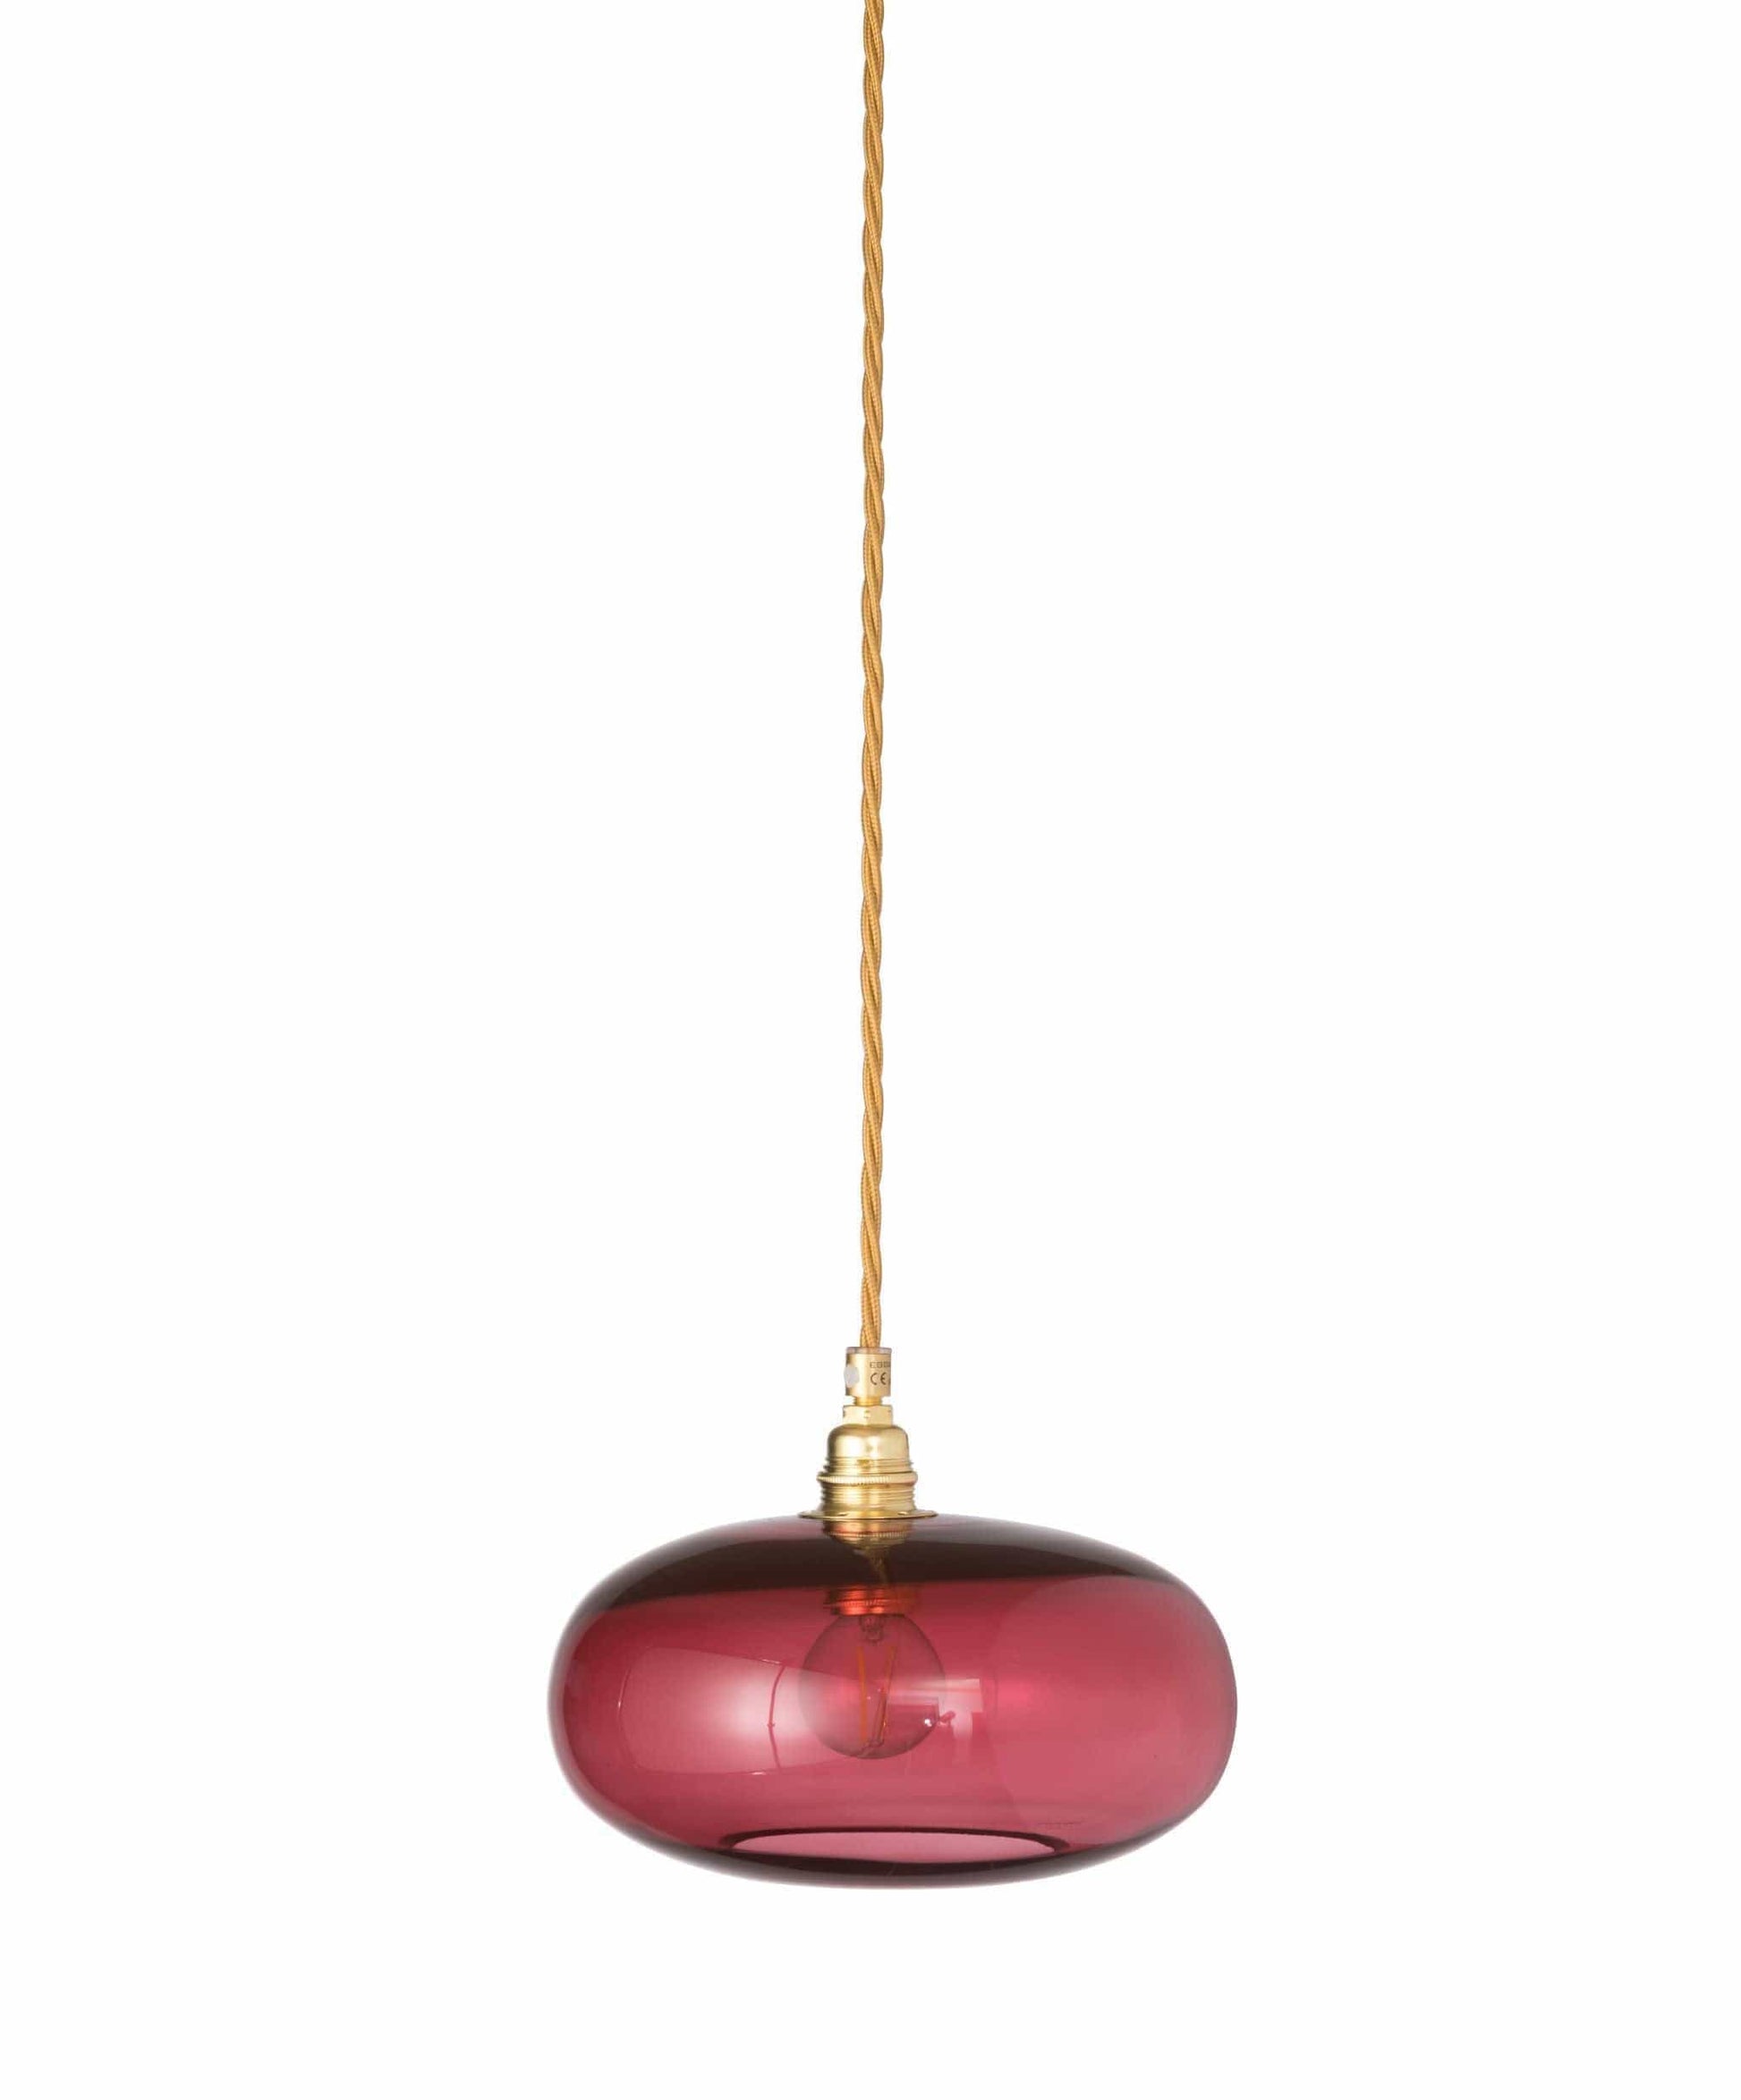 Ebb&Flow Pendant lights Bright coral with gold fittings Horizon Mouth-Blown Glass Pendant Light, small